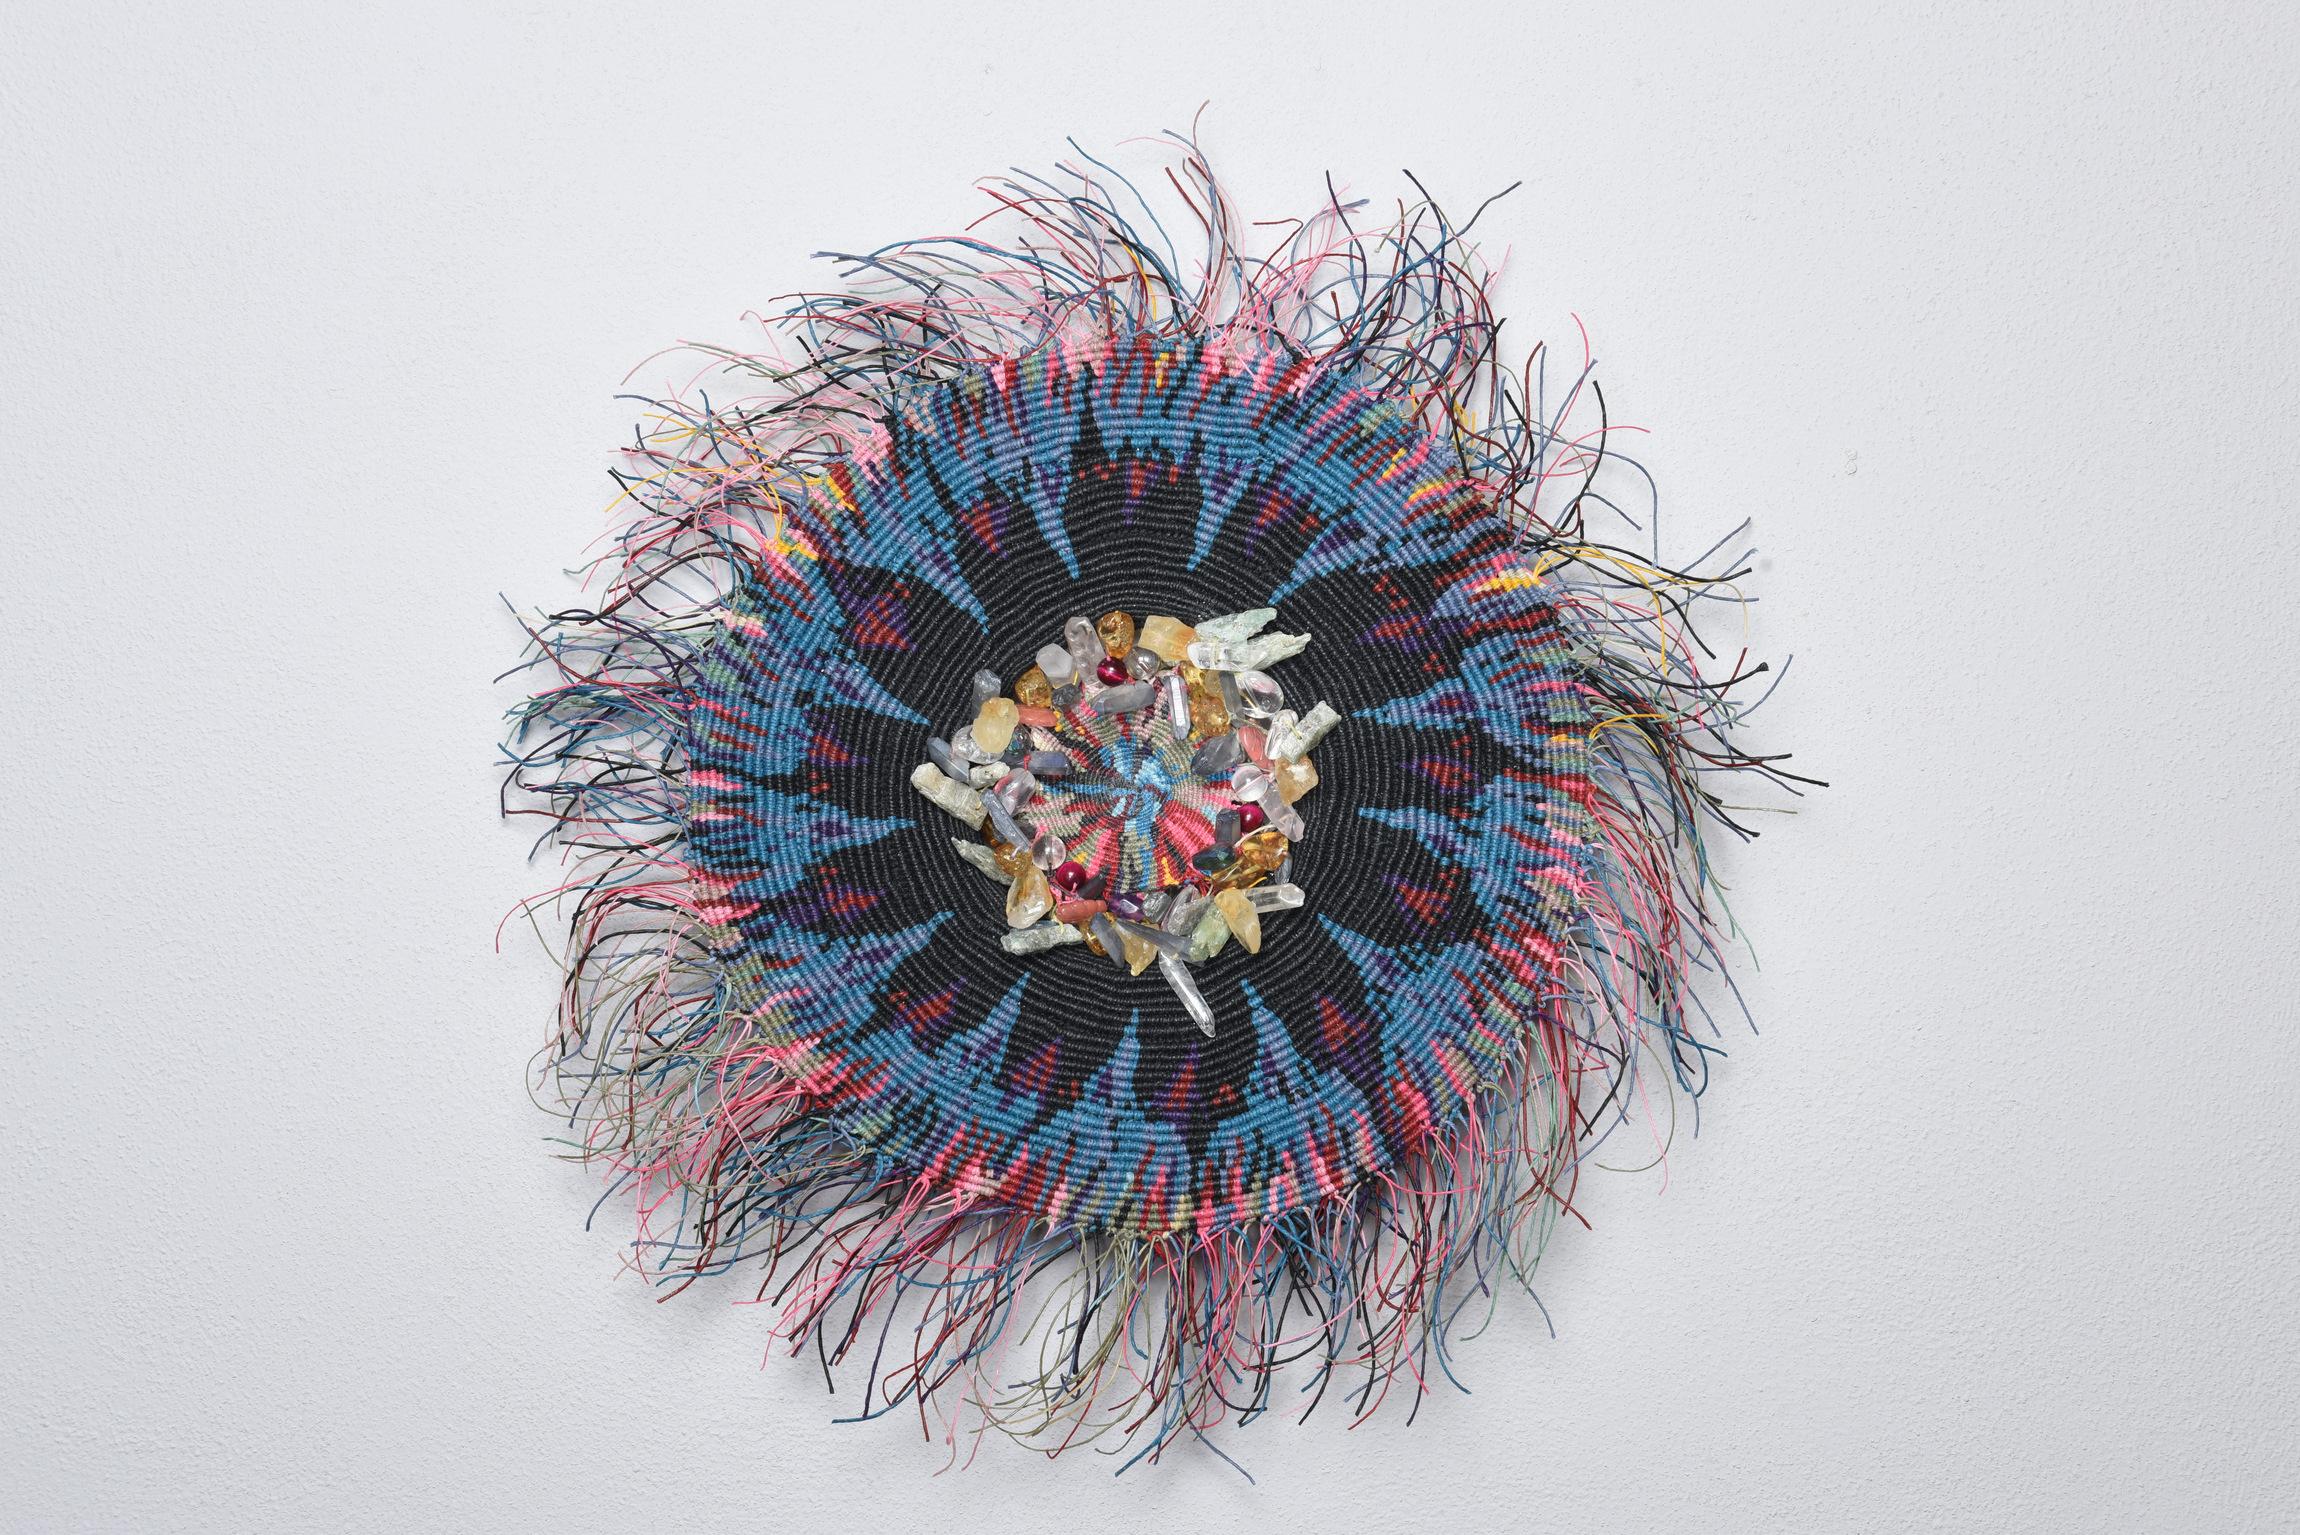 "this work is from self-taught traditional textile techniques begun in childhood and pursued throughout my domestic life. Knotting is a recent acquisition in my skill set and came from direct observation of the work of Jane Sauer, a former studio